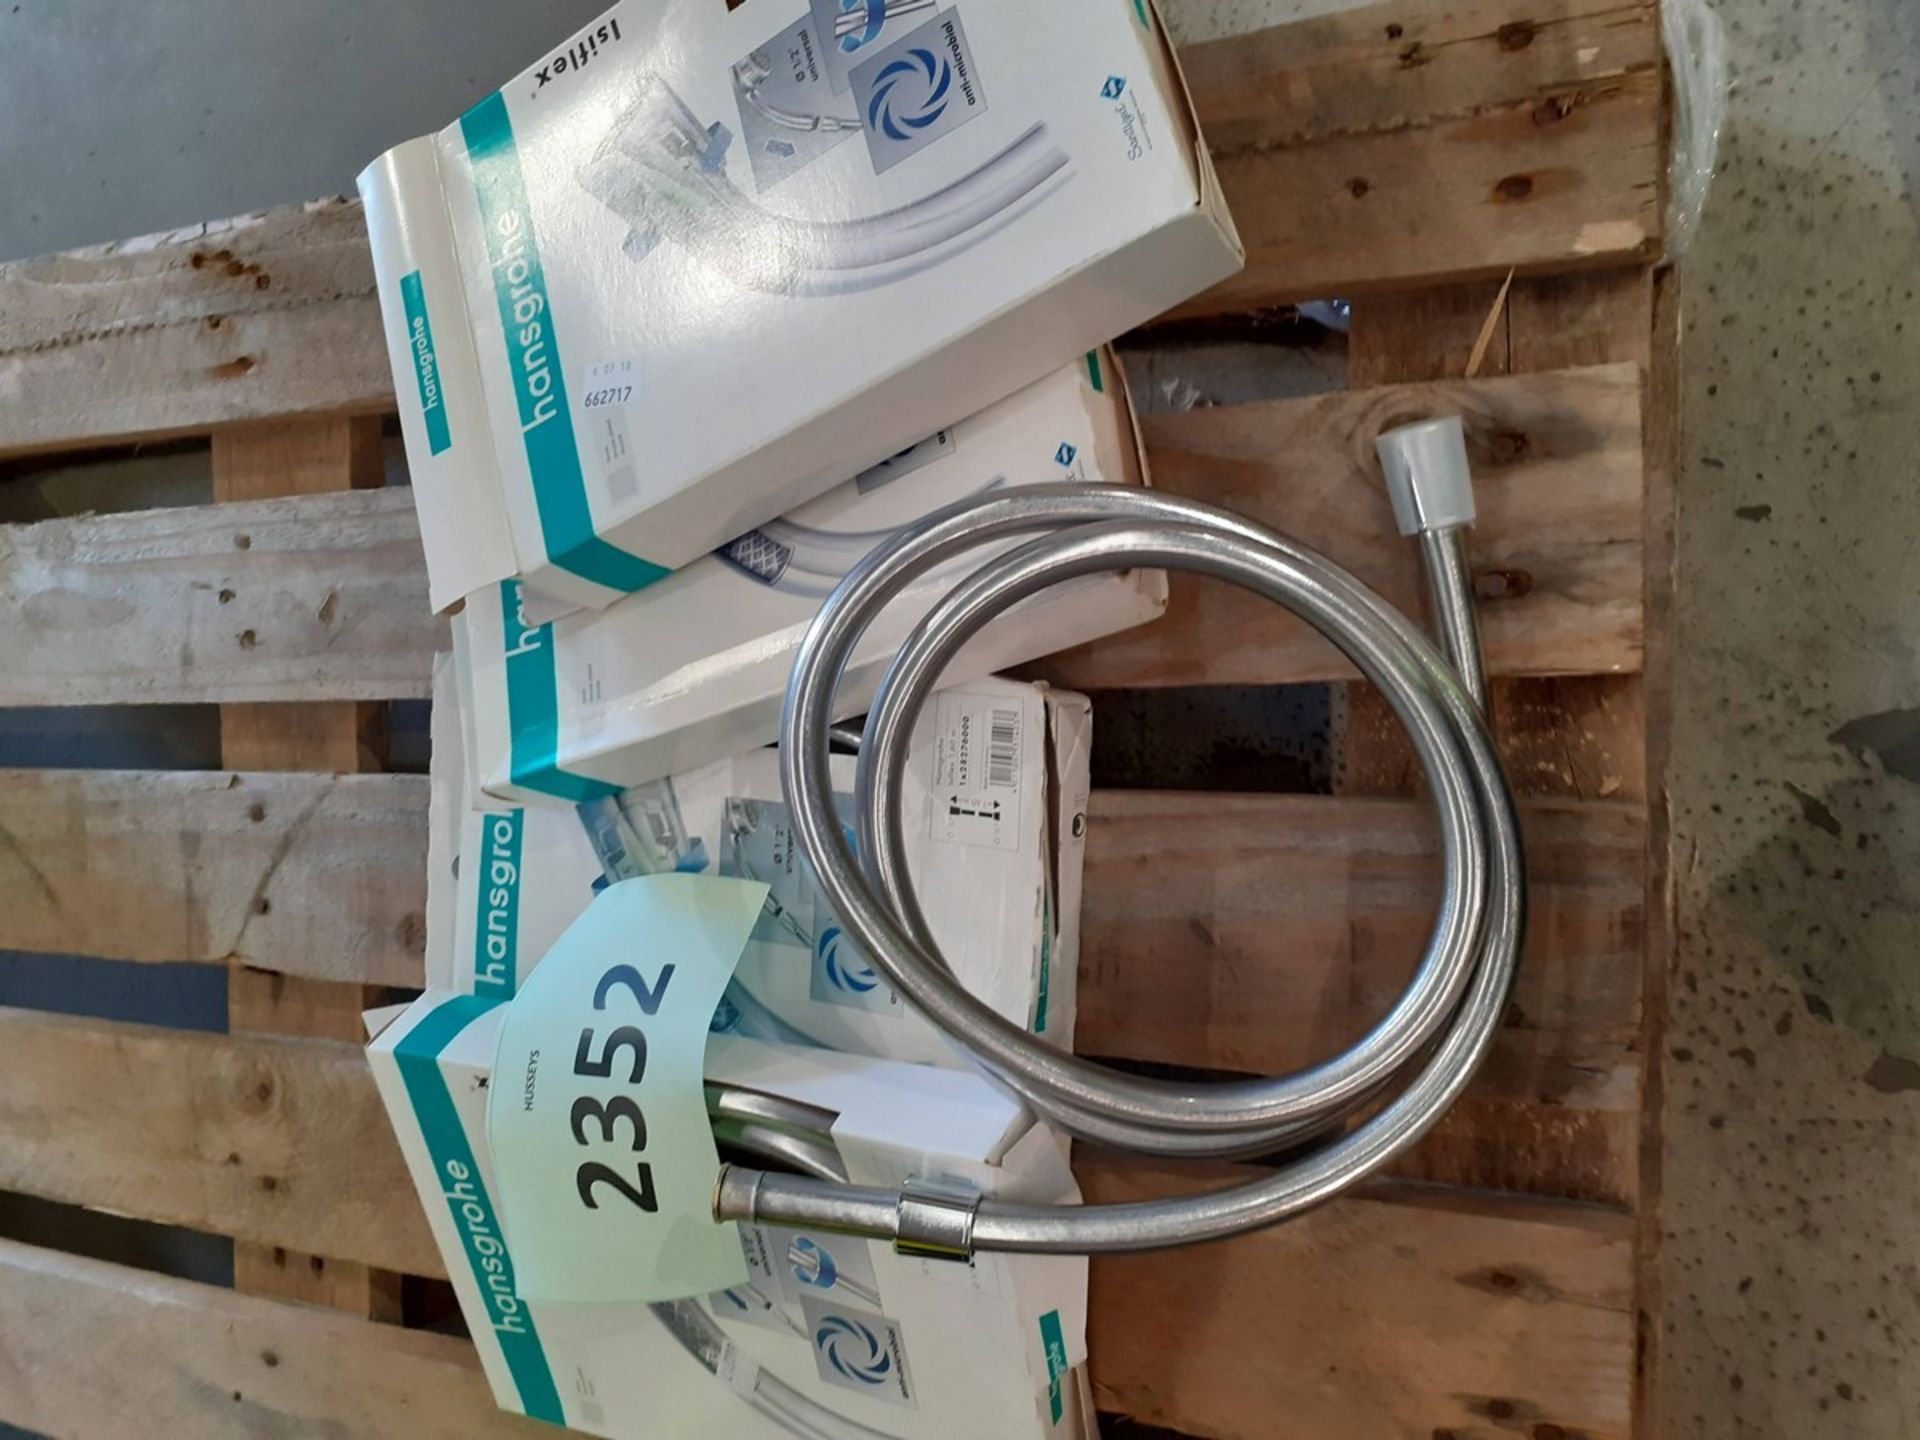 Hansgrohe isiflex chrome plated shower hose 1.6M - 28276-000 x4